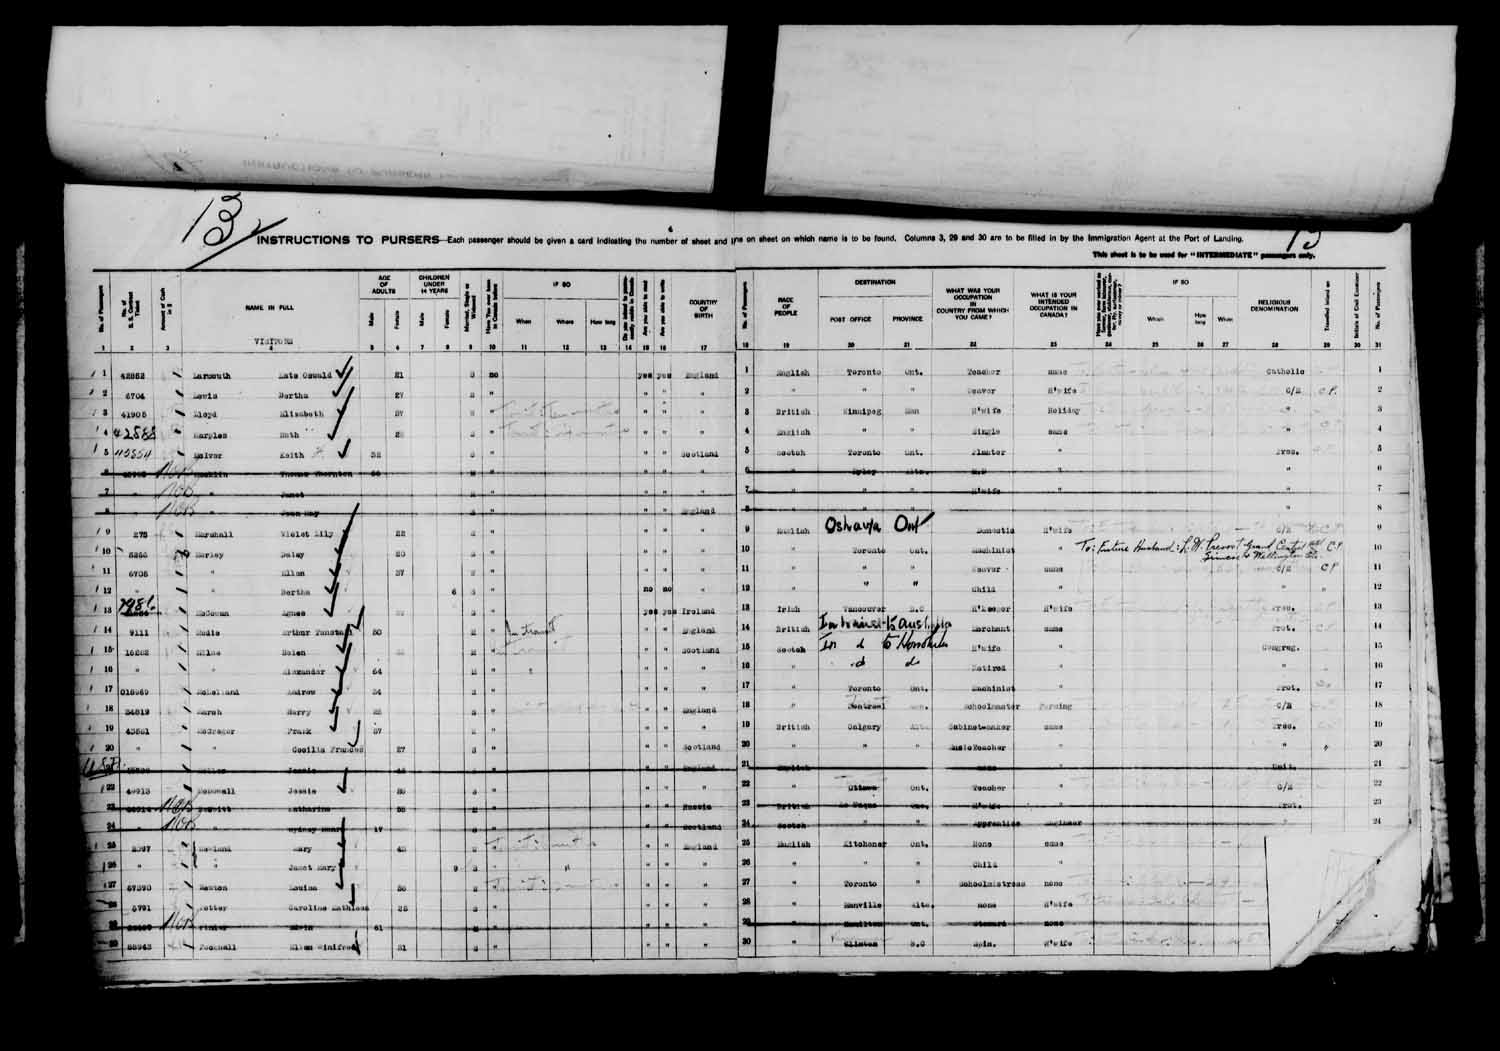 Digitized page of Passenger Lists for Image No.: e003610620